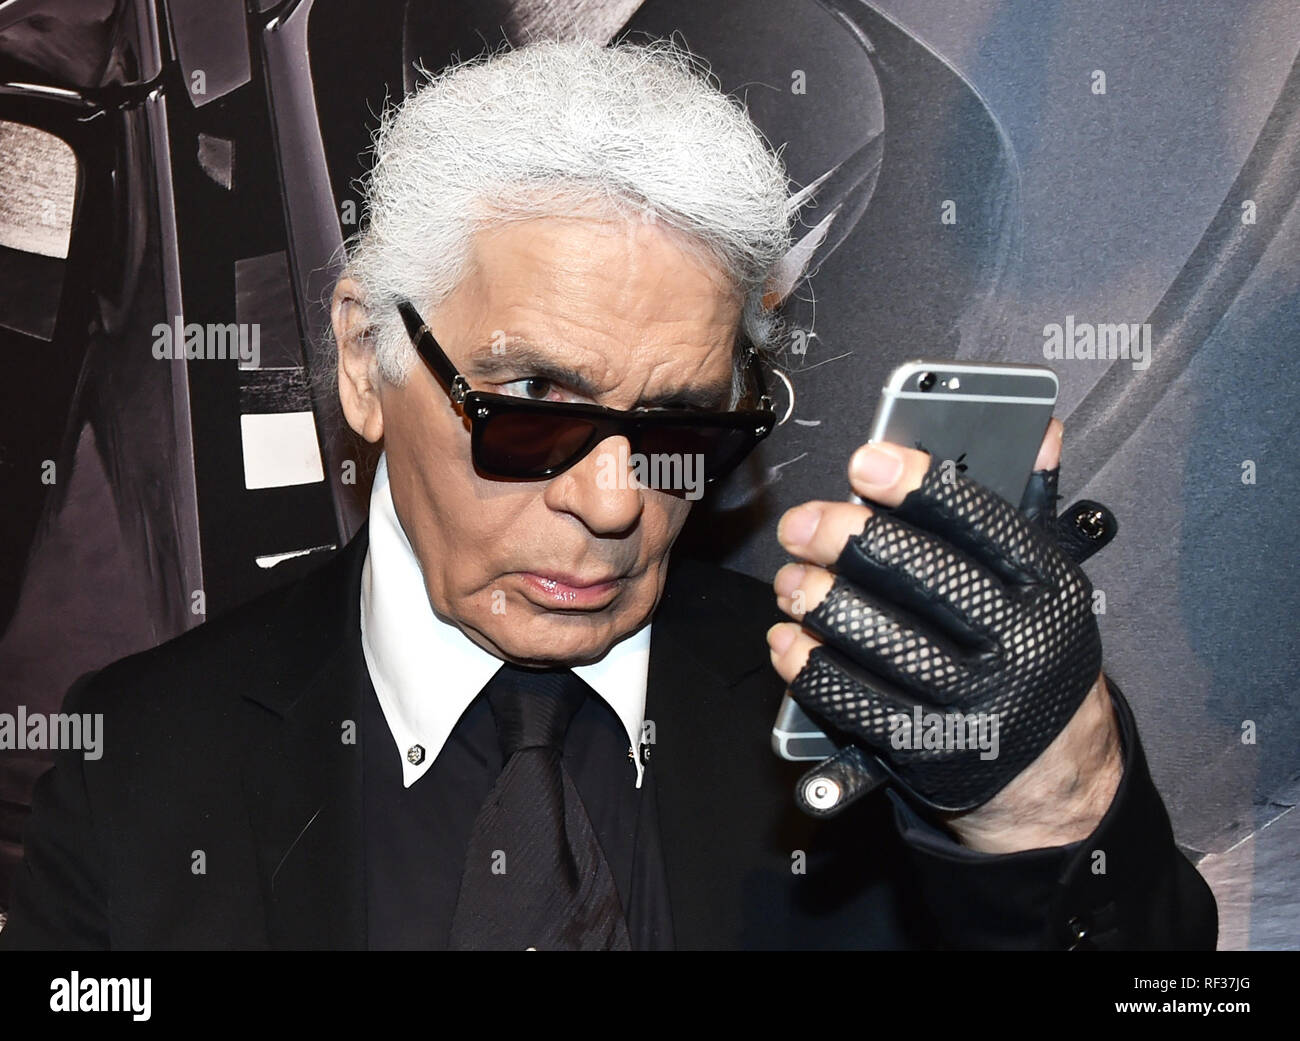 Berlin, Germany. 03rd Feb, 2015. Fashion designer Karl Lagerfeld stands  watching his smartphone at the vernissage for his photo calender 'Corsa Karl  and Choupette' at the Palazzo Italia in Berlin, Germany, 03